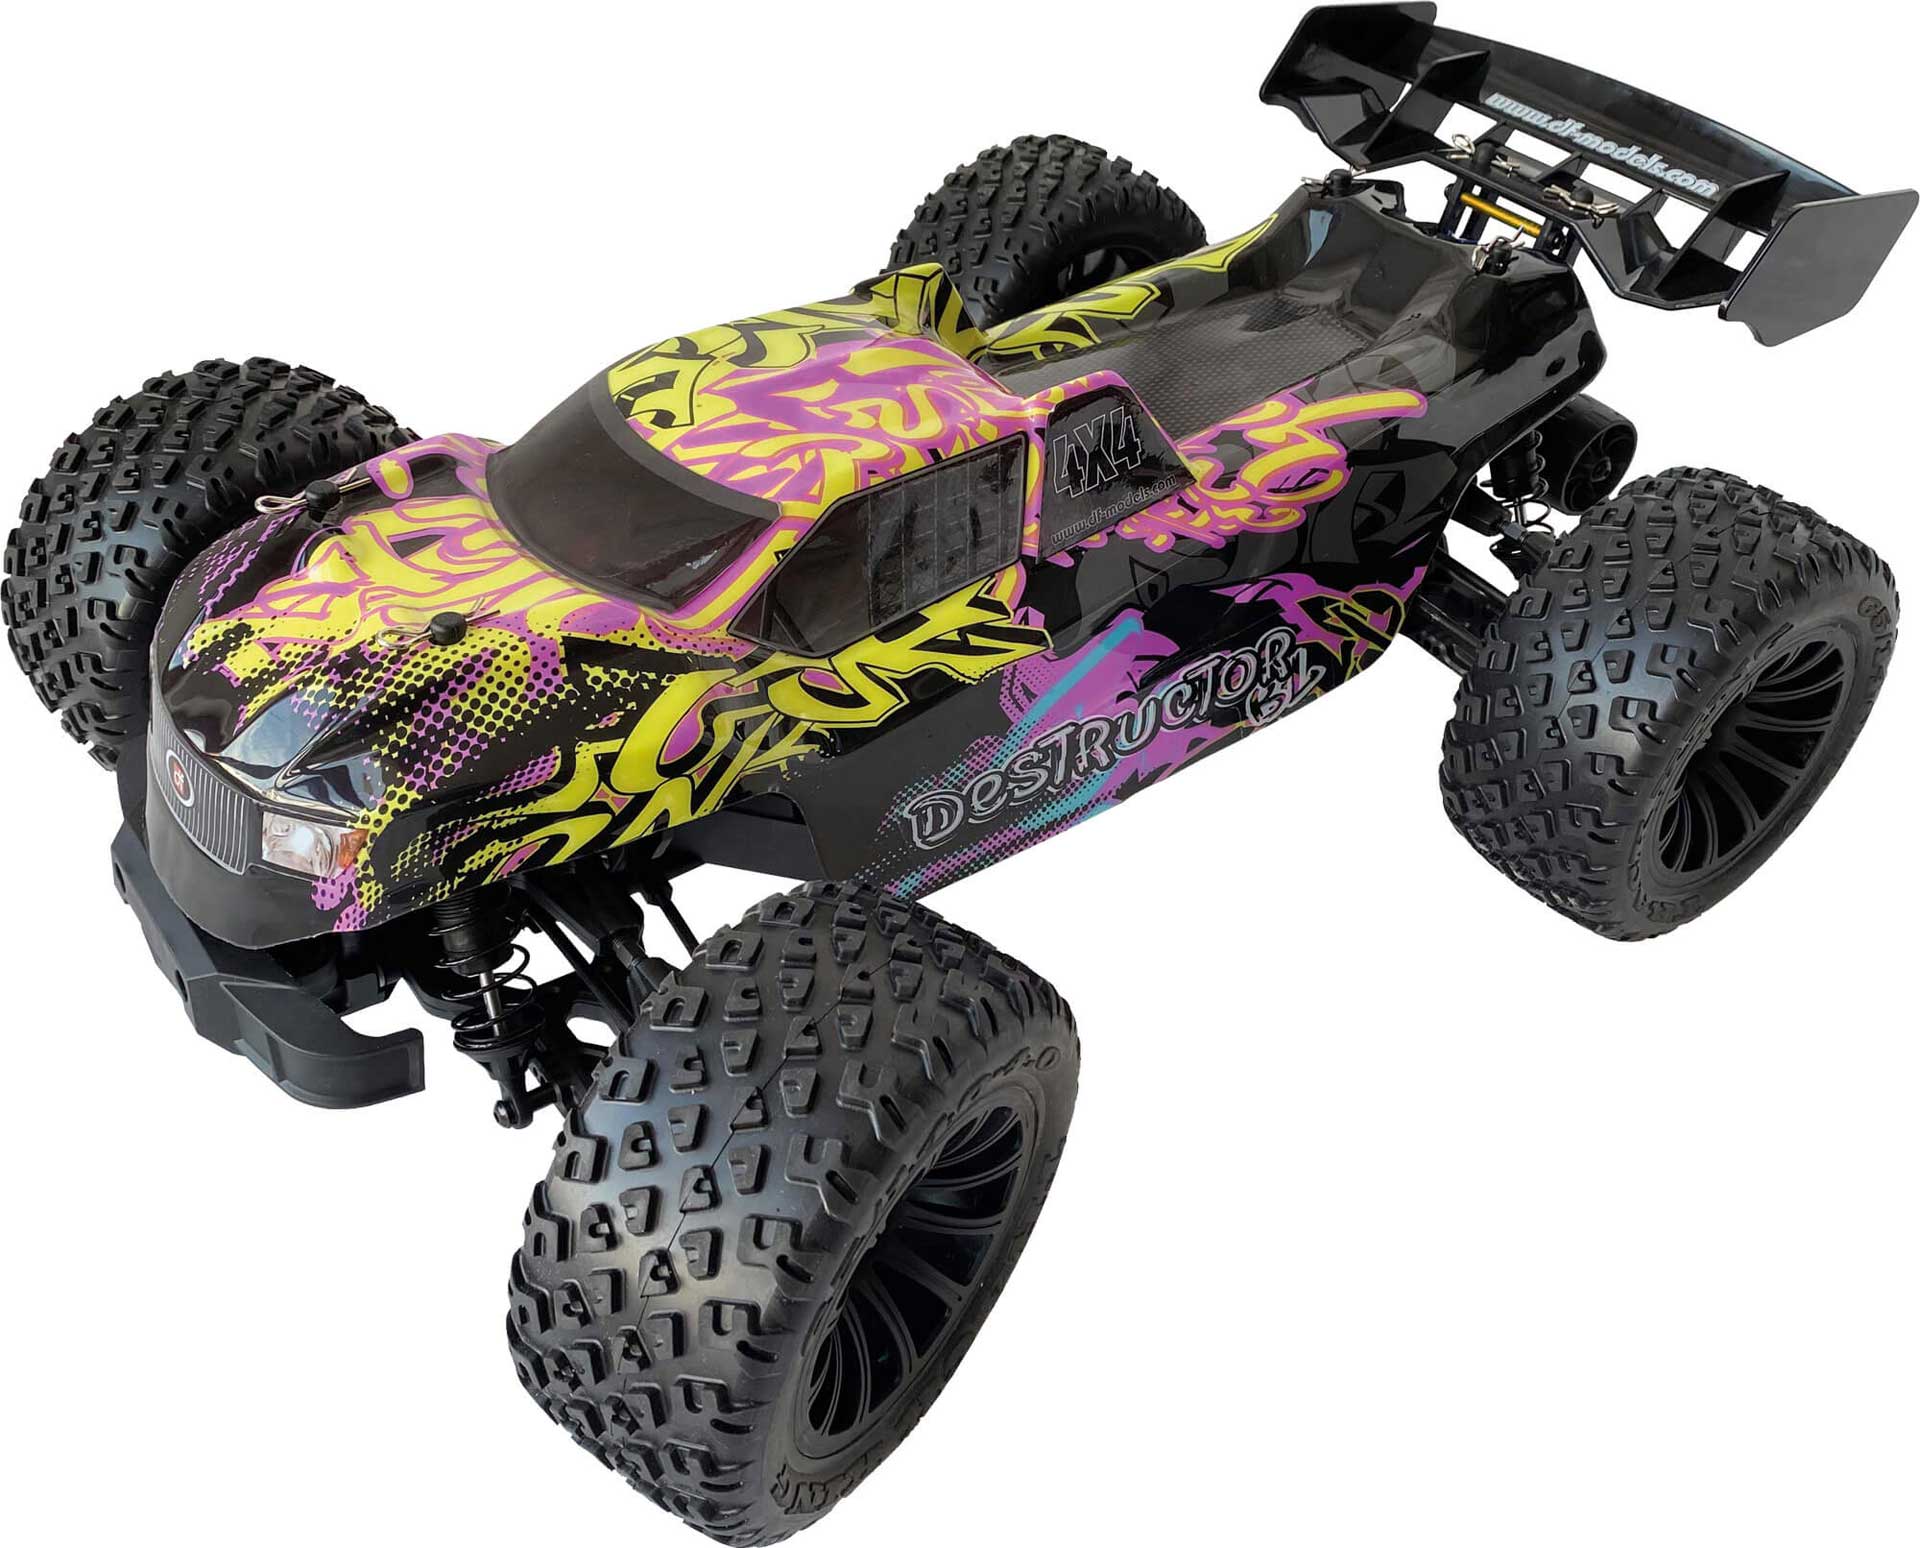 DRIVE & FLY MODELS Destructor BL 1/8 Truggy 4WD EP RTR Brushless